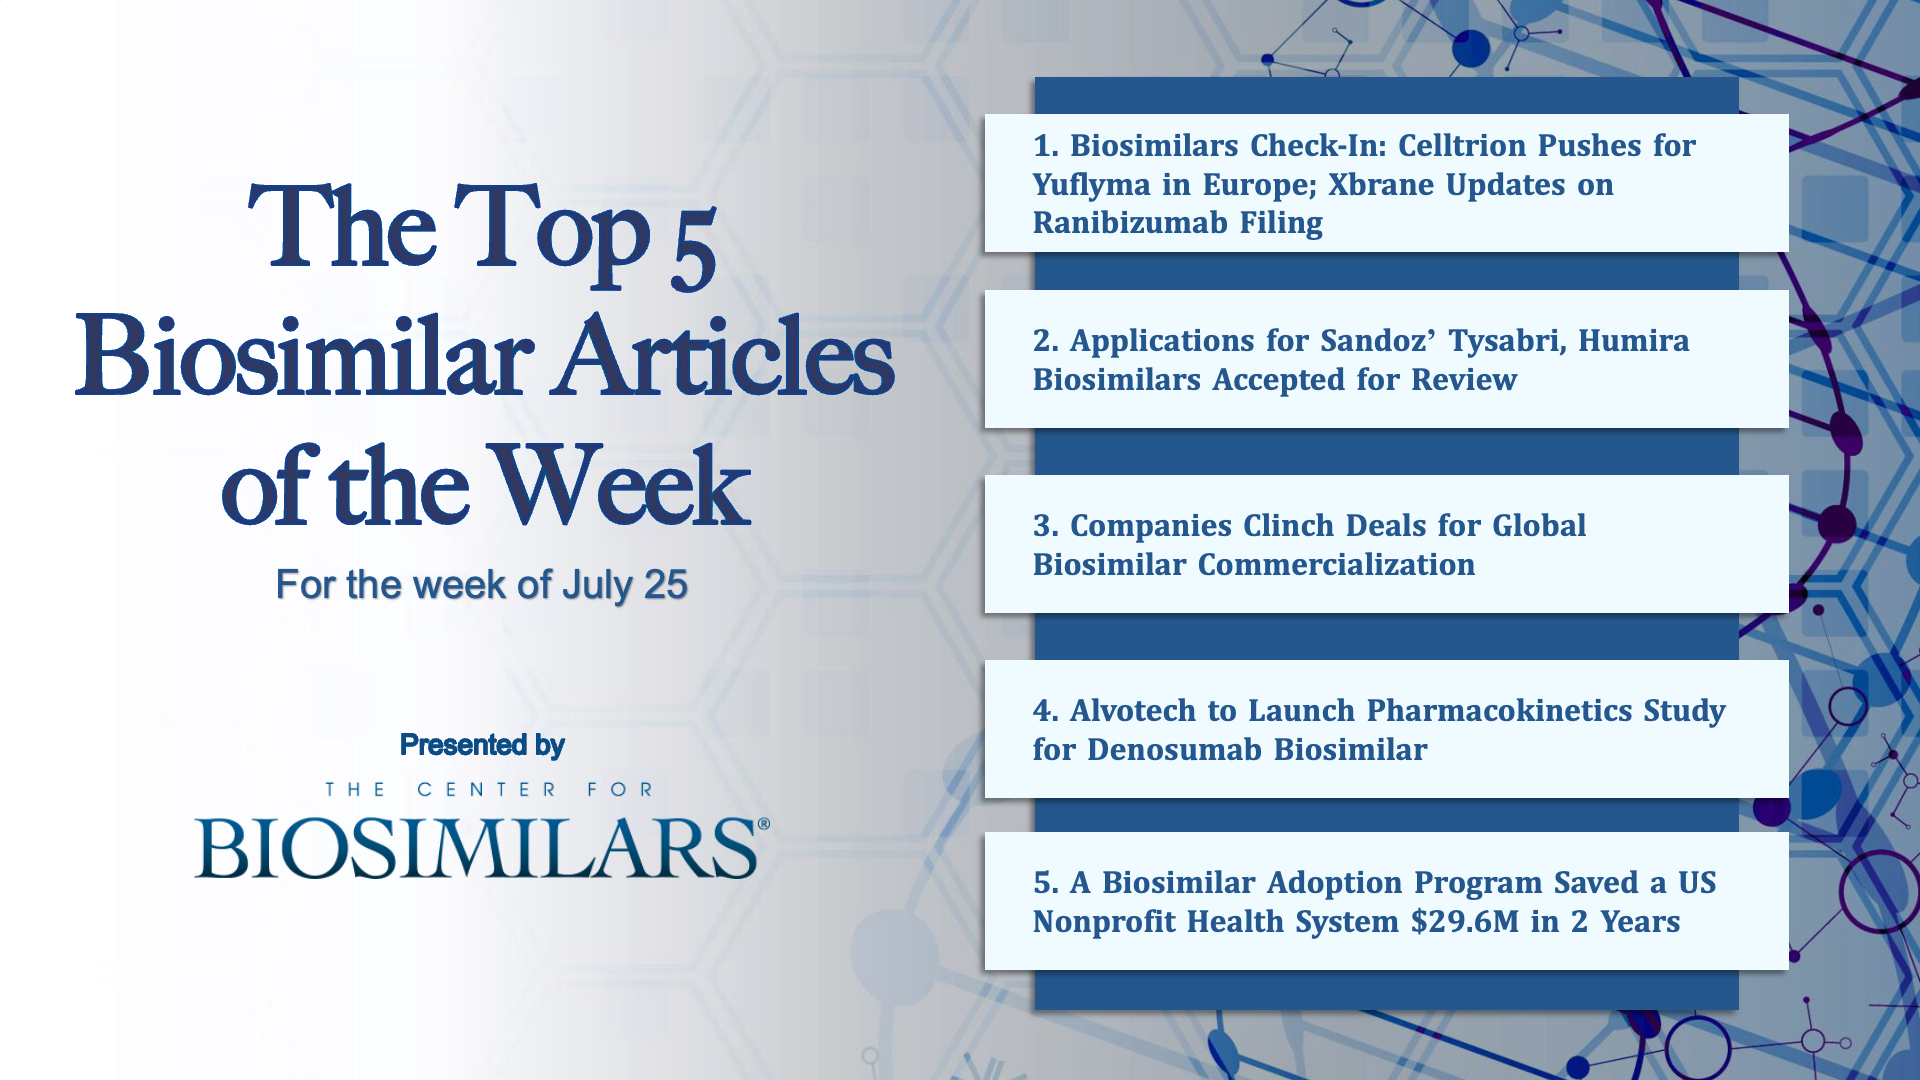 Here are the top 5 biosimilar articles for the week of July 25, 2022.